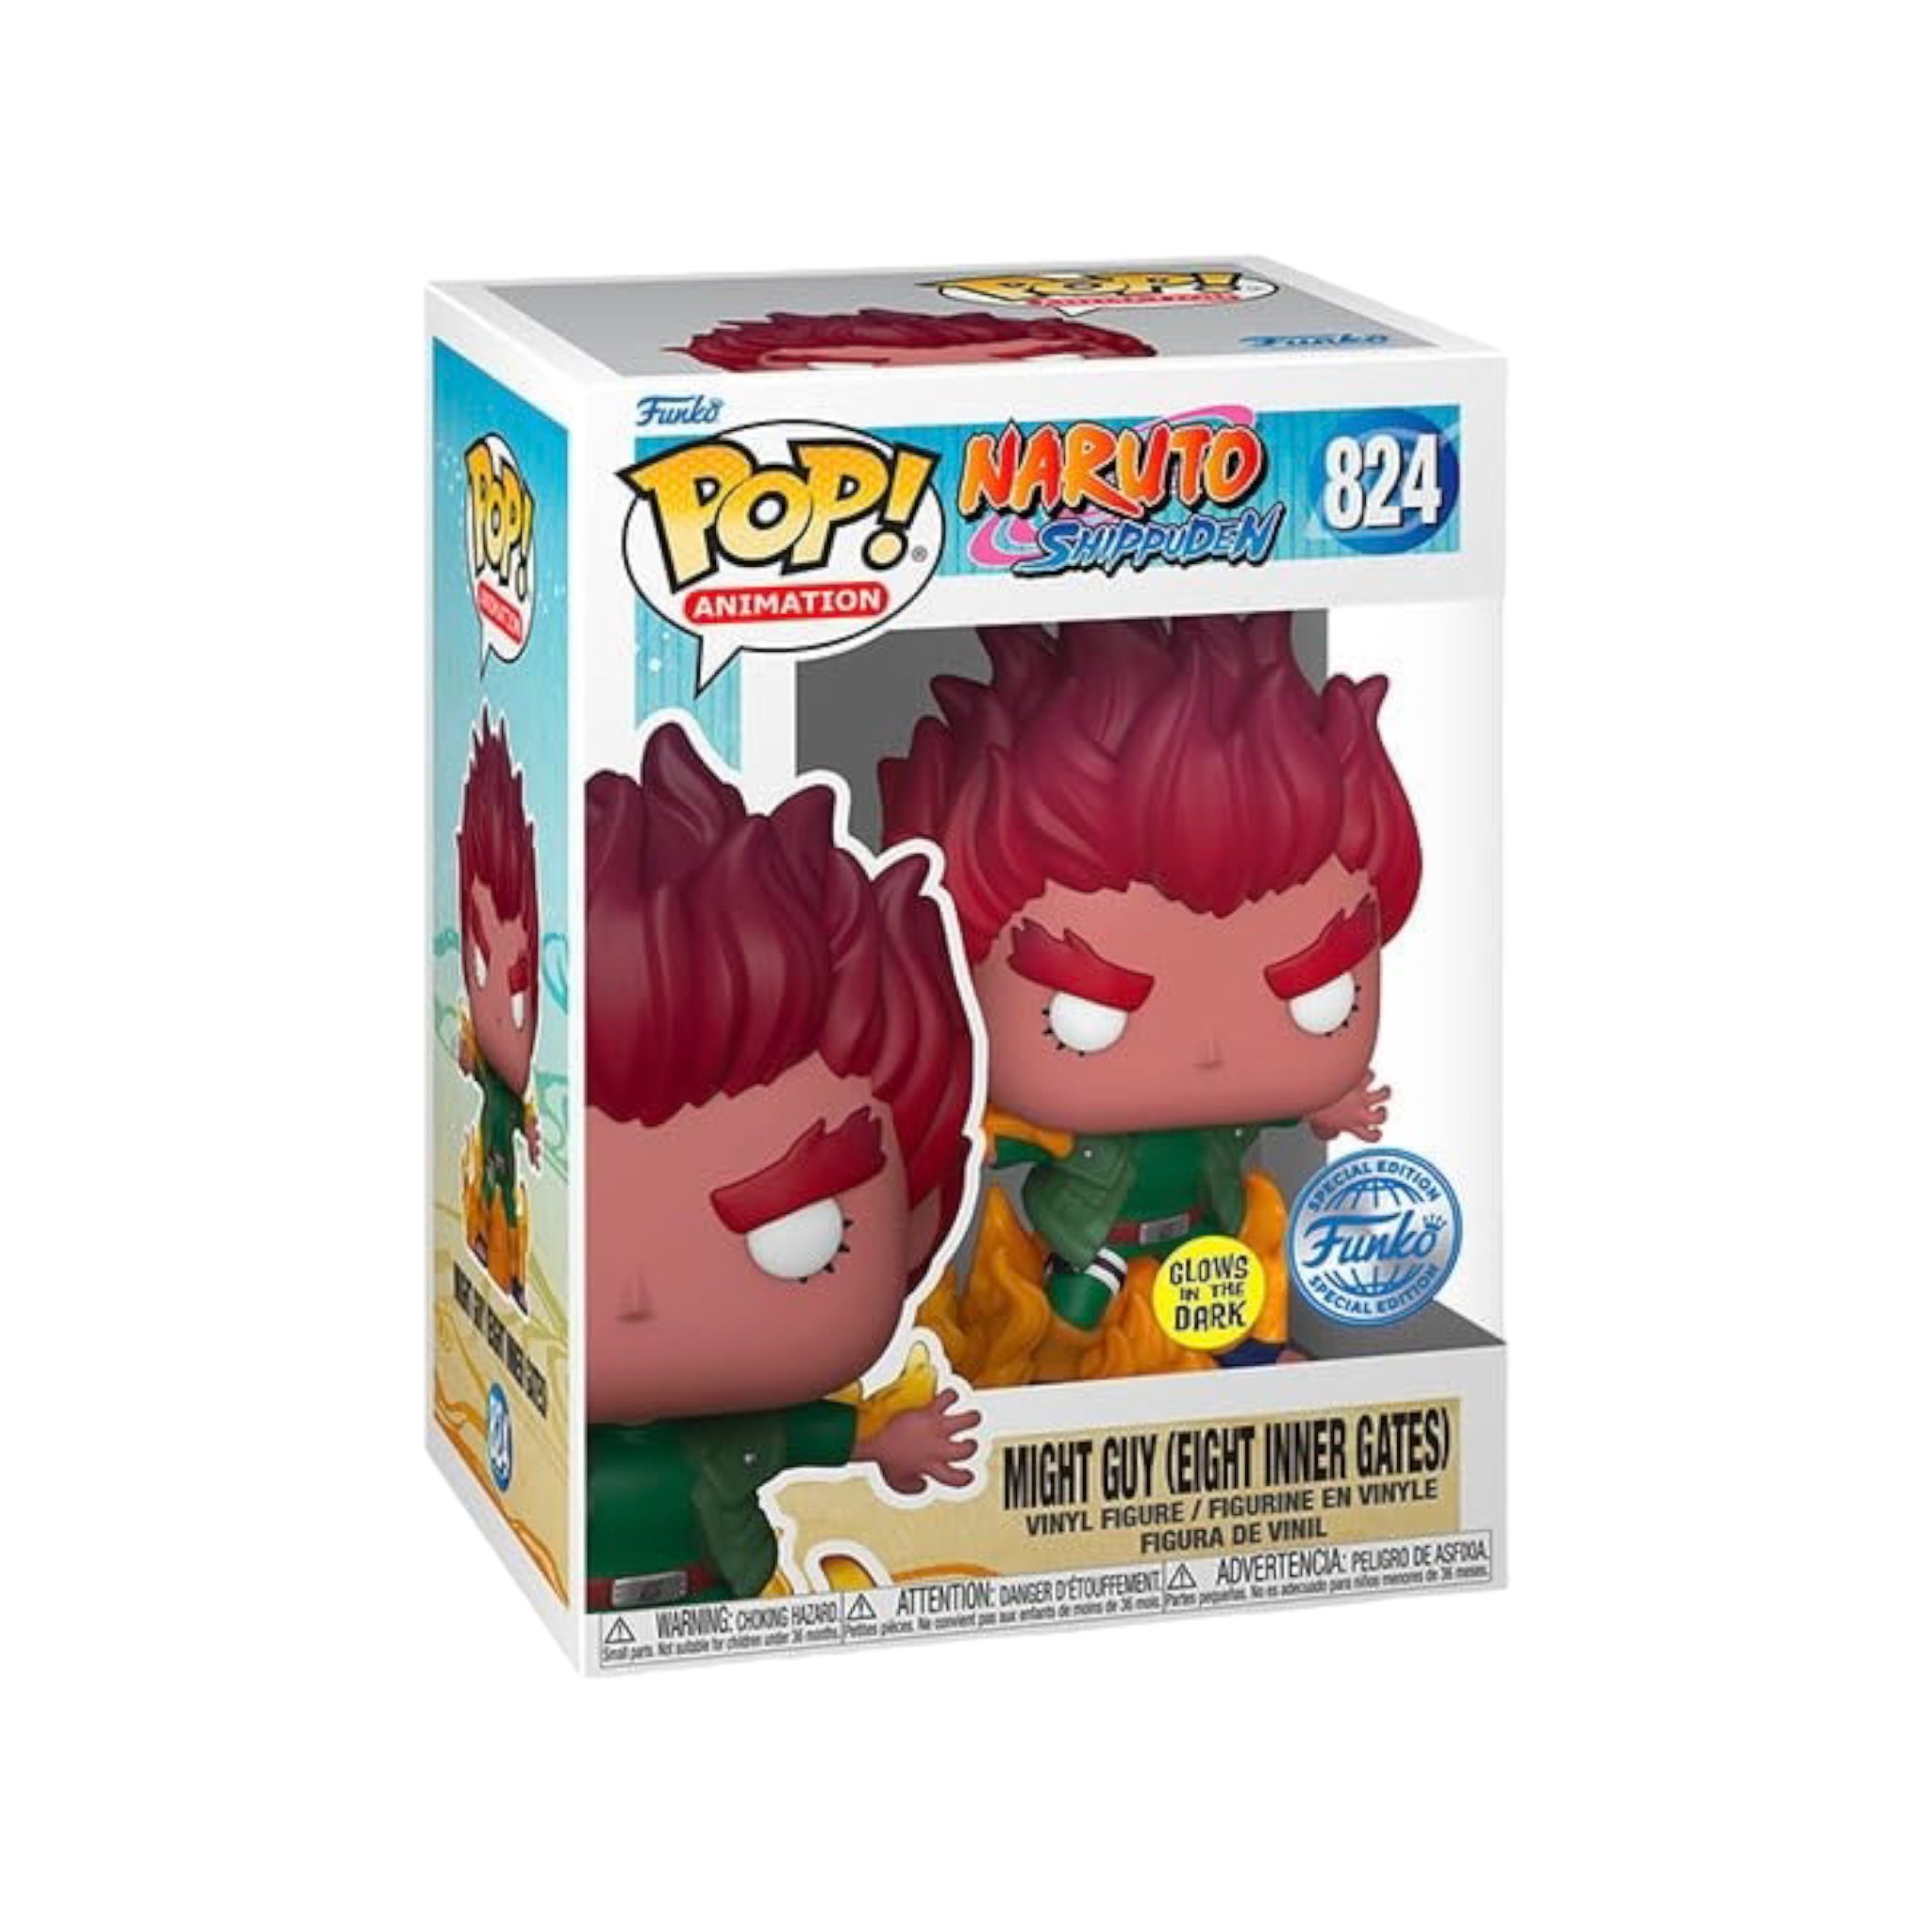 Might Guy (Eight Inner Gates) #824 (Glows in the Dark) Funko Pop! - Naruto Shippuden - Special Edition